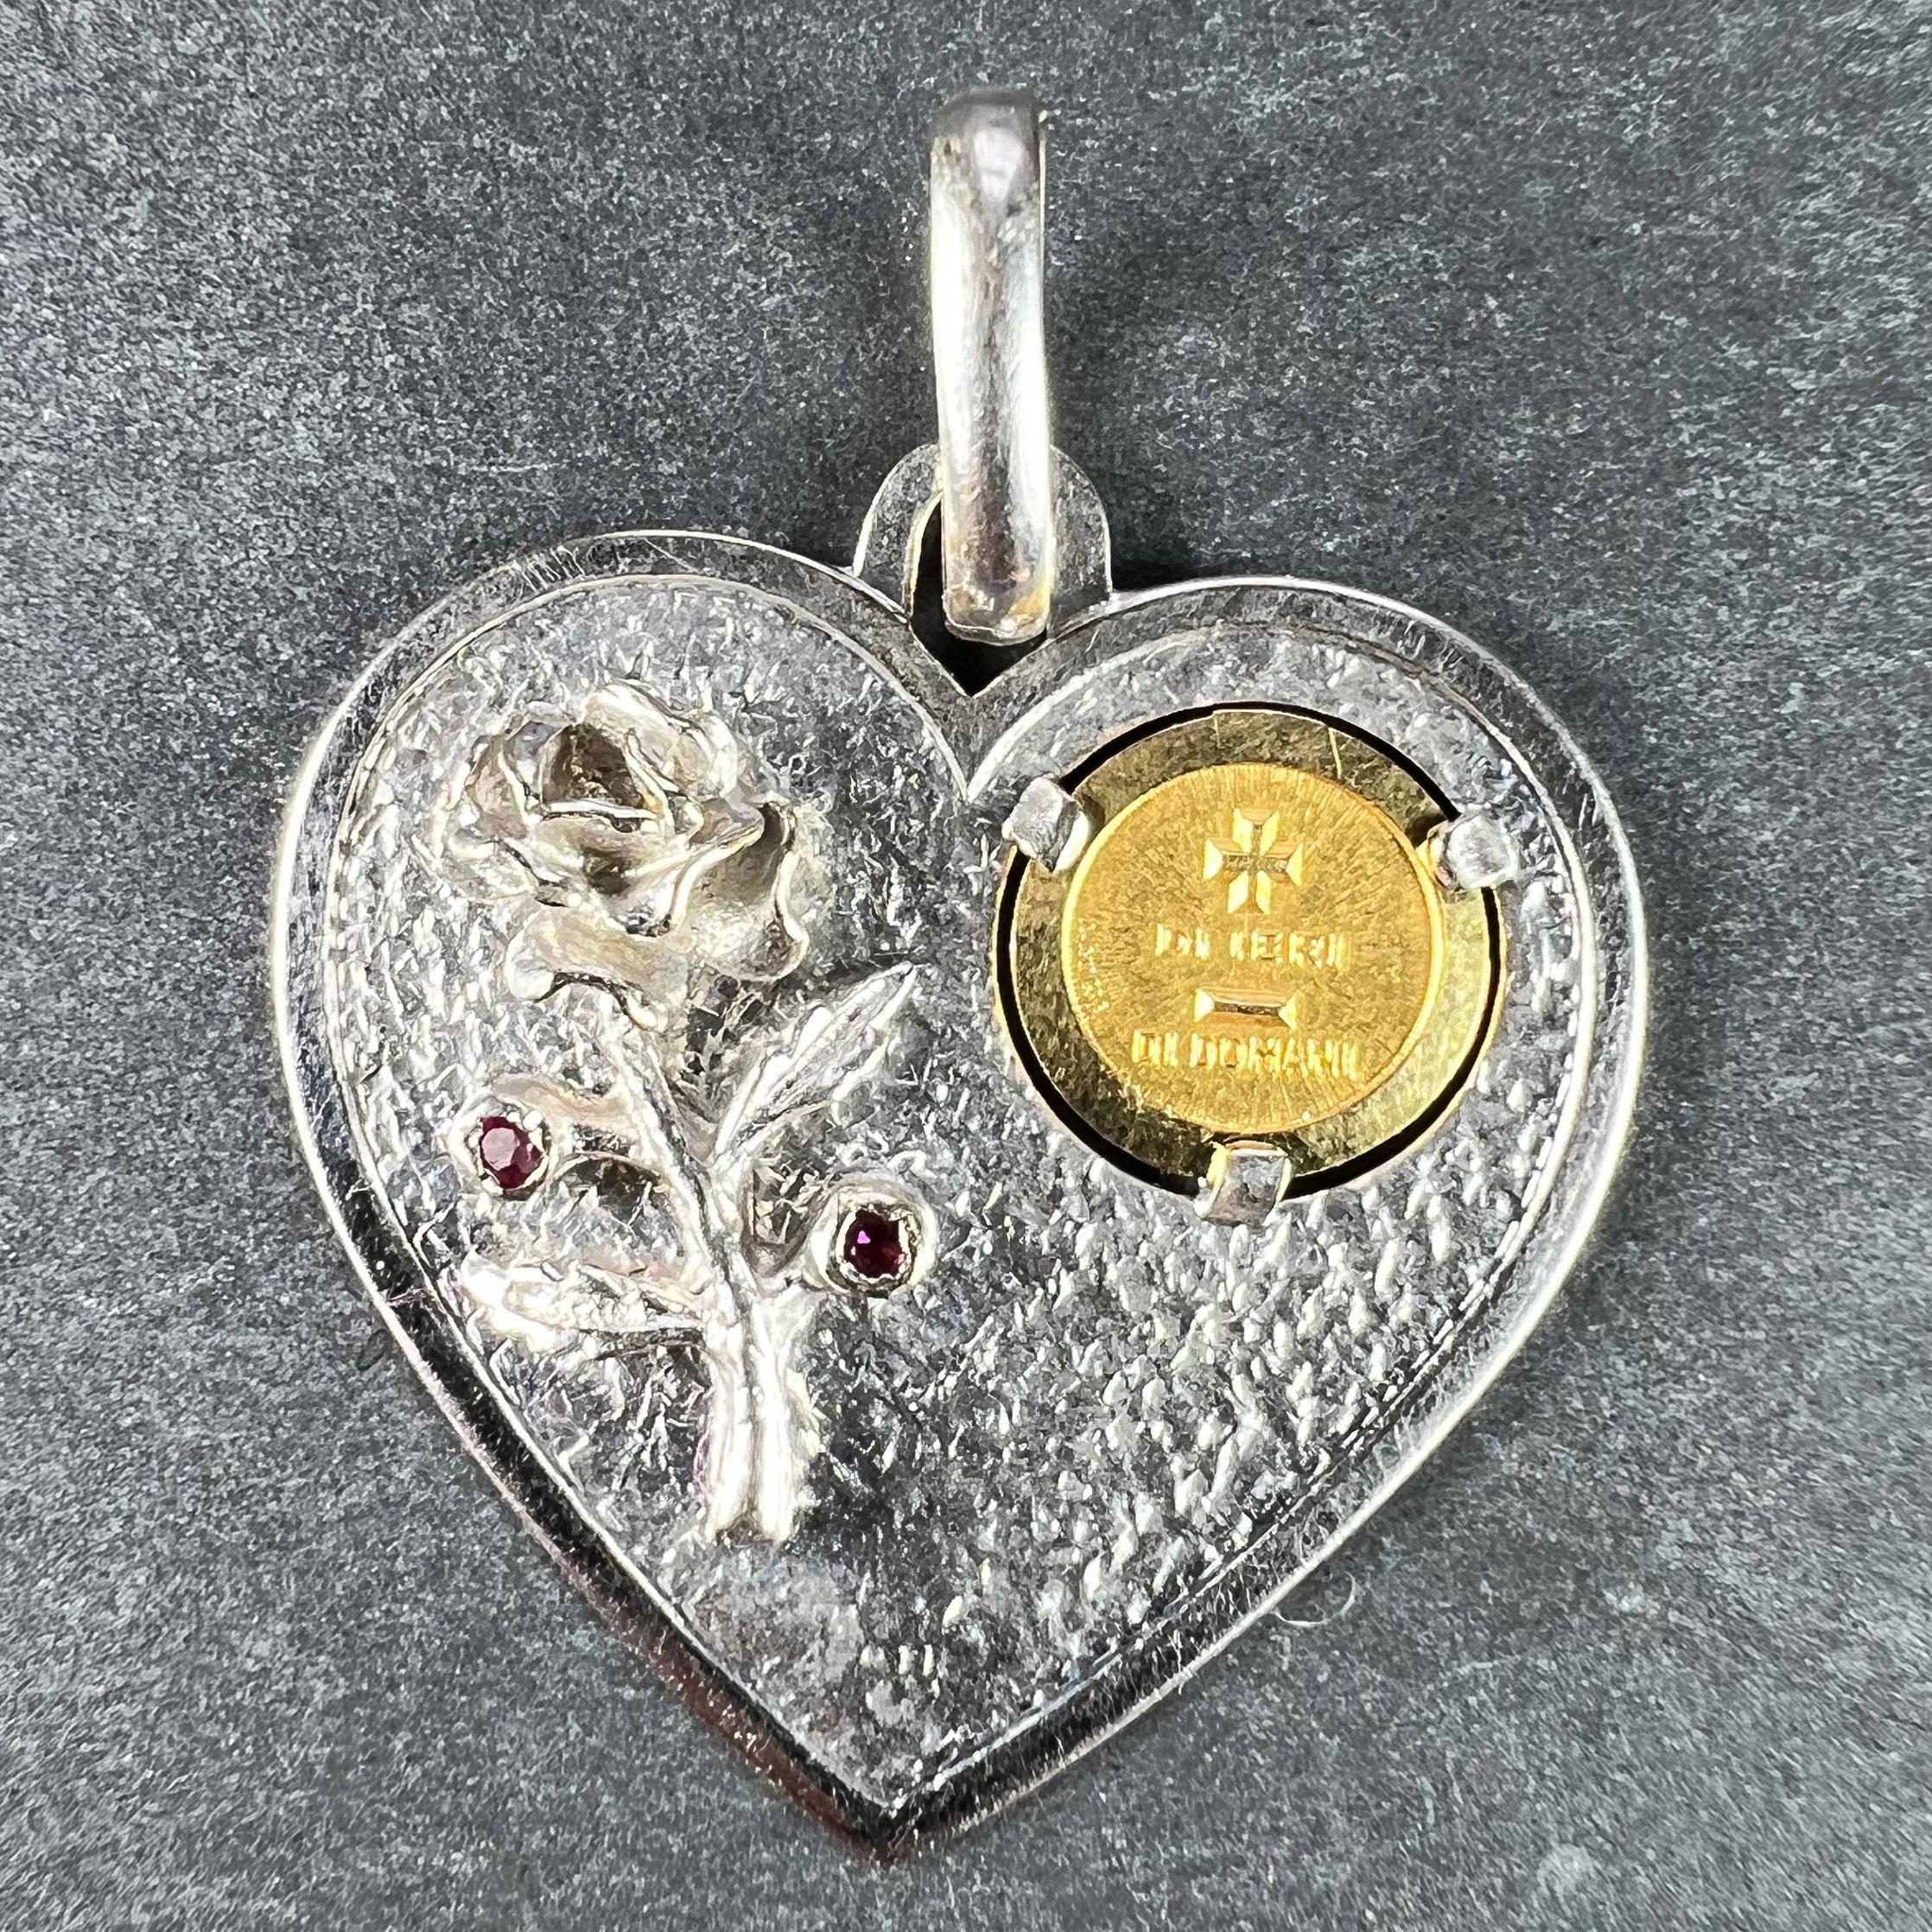 An Italian 18 karat (18K) white and yellow gold love charm pendant designed as a white gold heart with a sculpted rose set with two ruby flower buds. To the right-hand side an inset yellow gold medallion with a rebus spelling out 